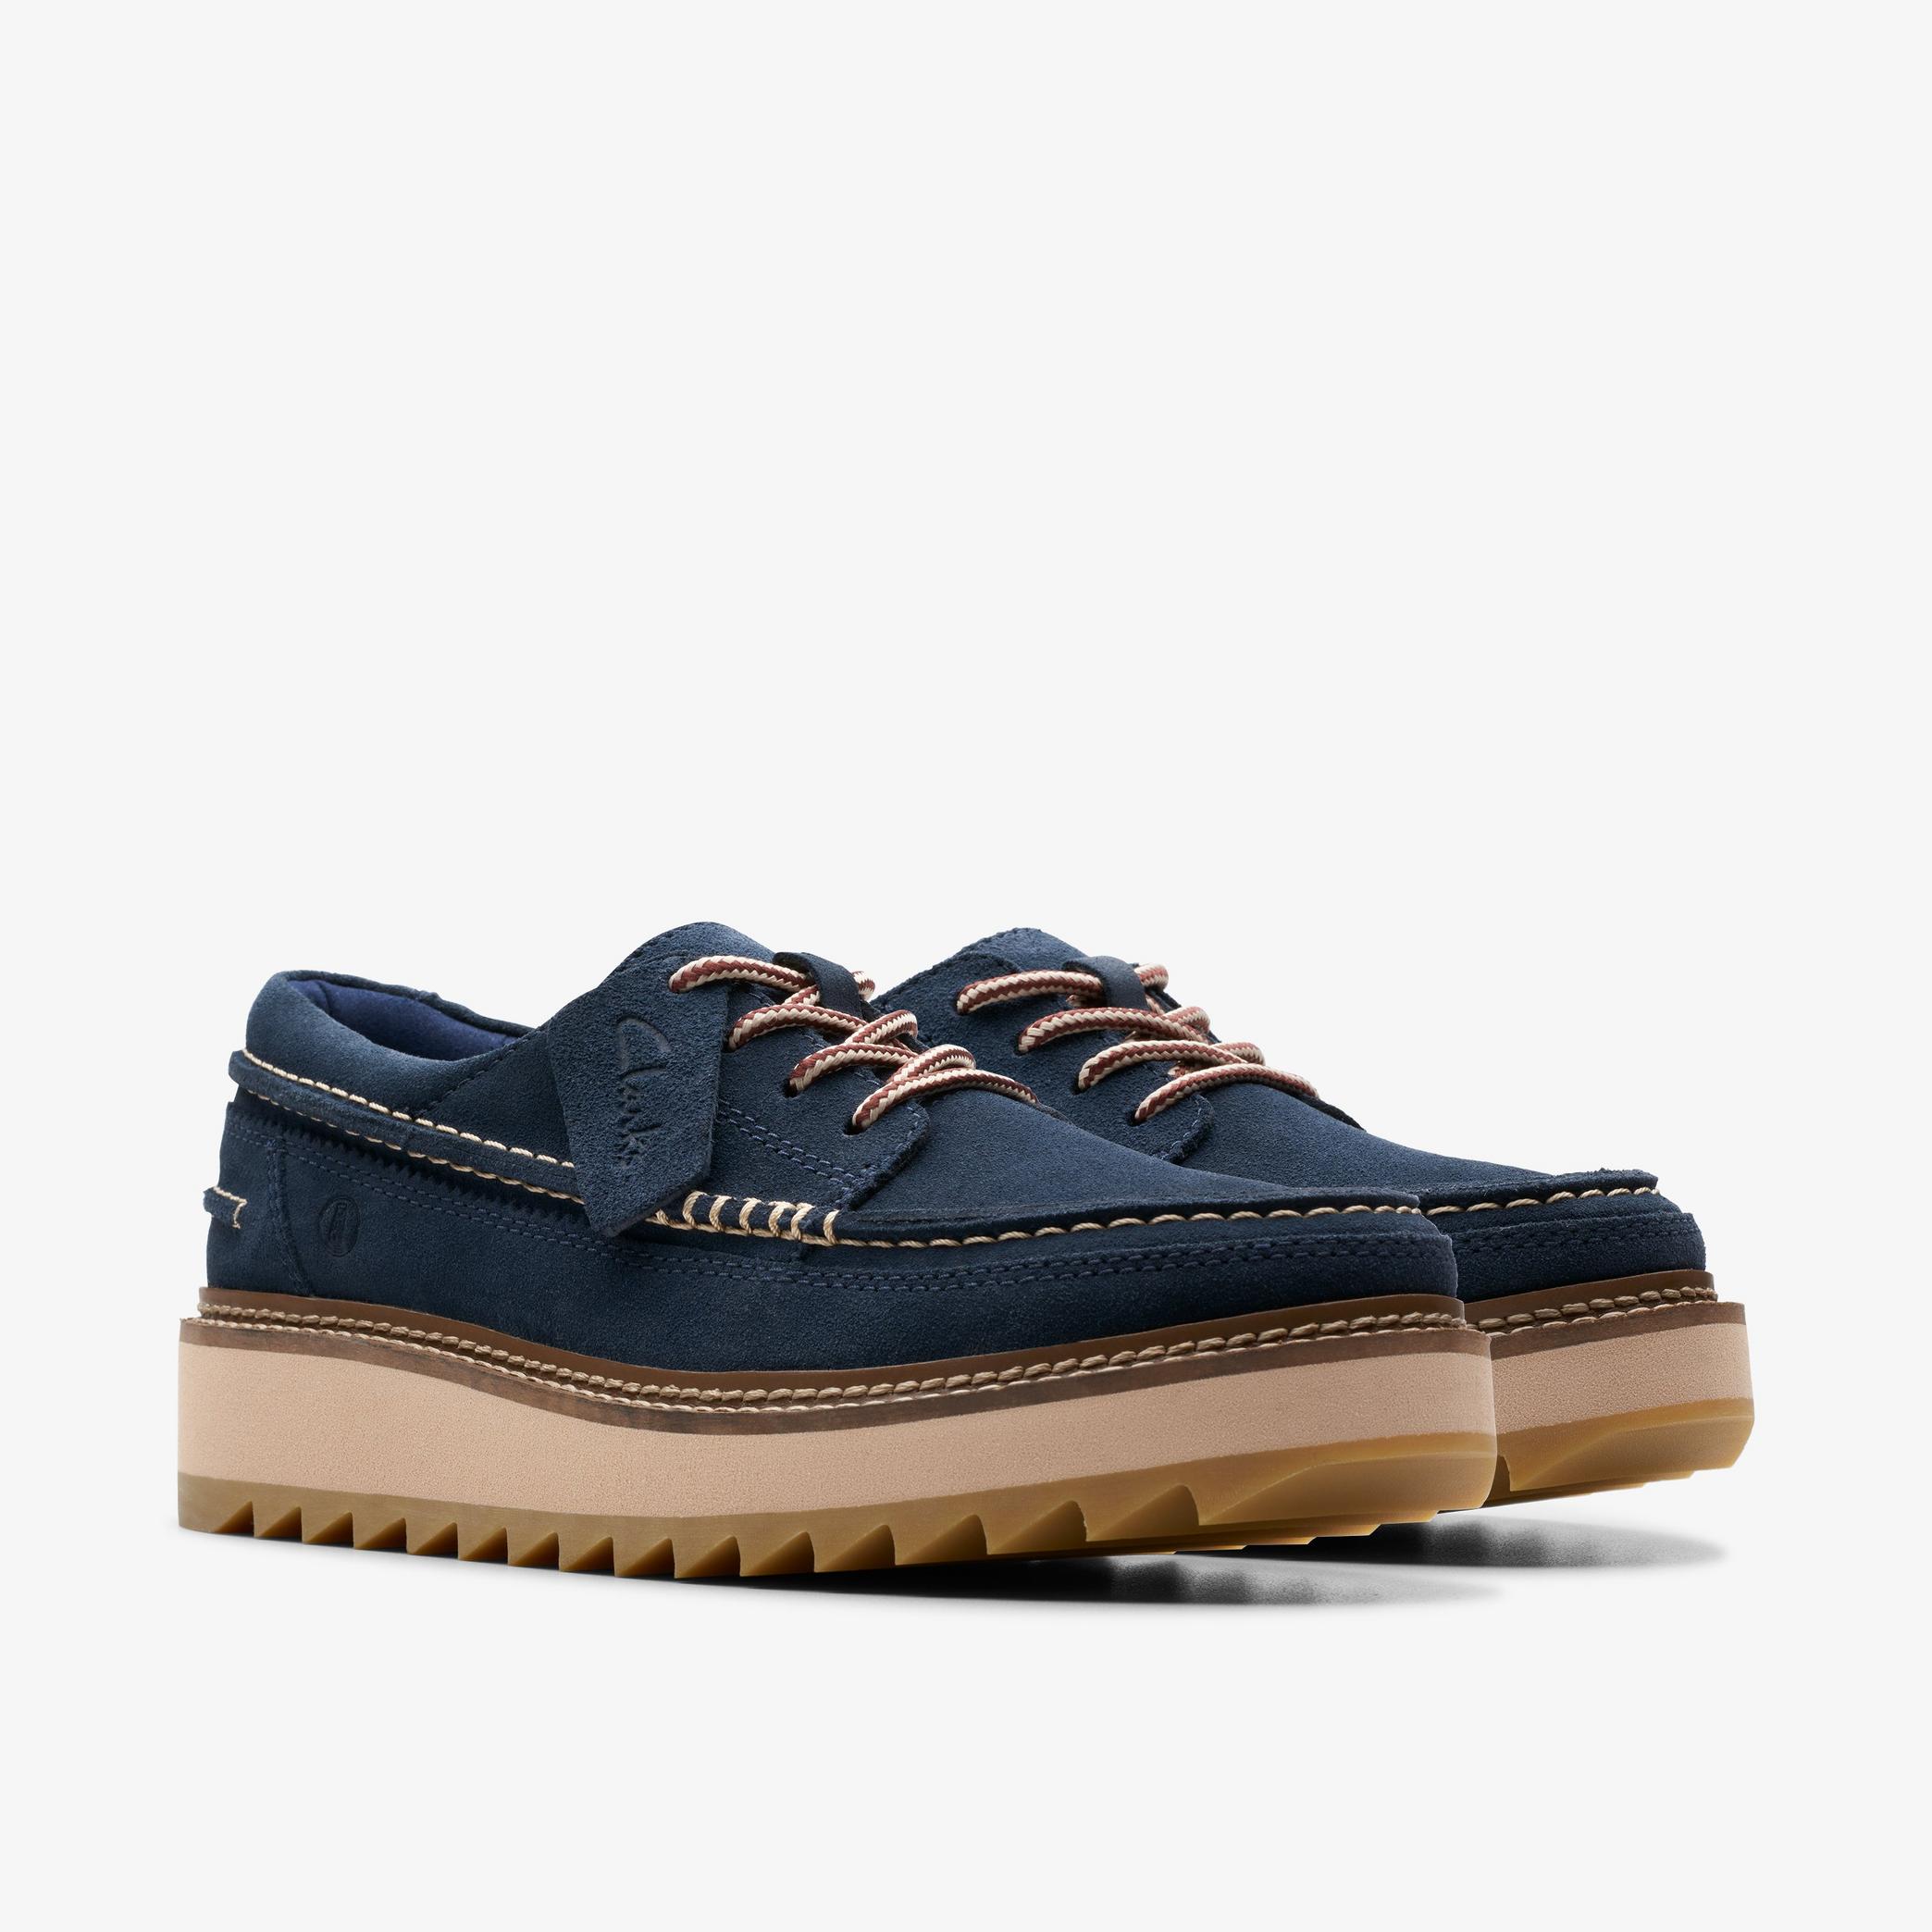 Clarkhill Lace Navy Suede Moccasins, view 4 of 6